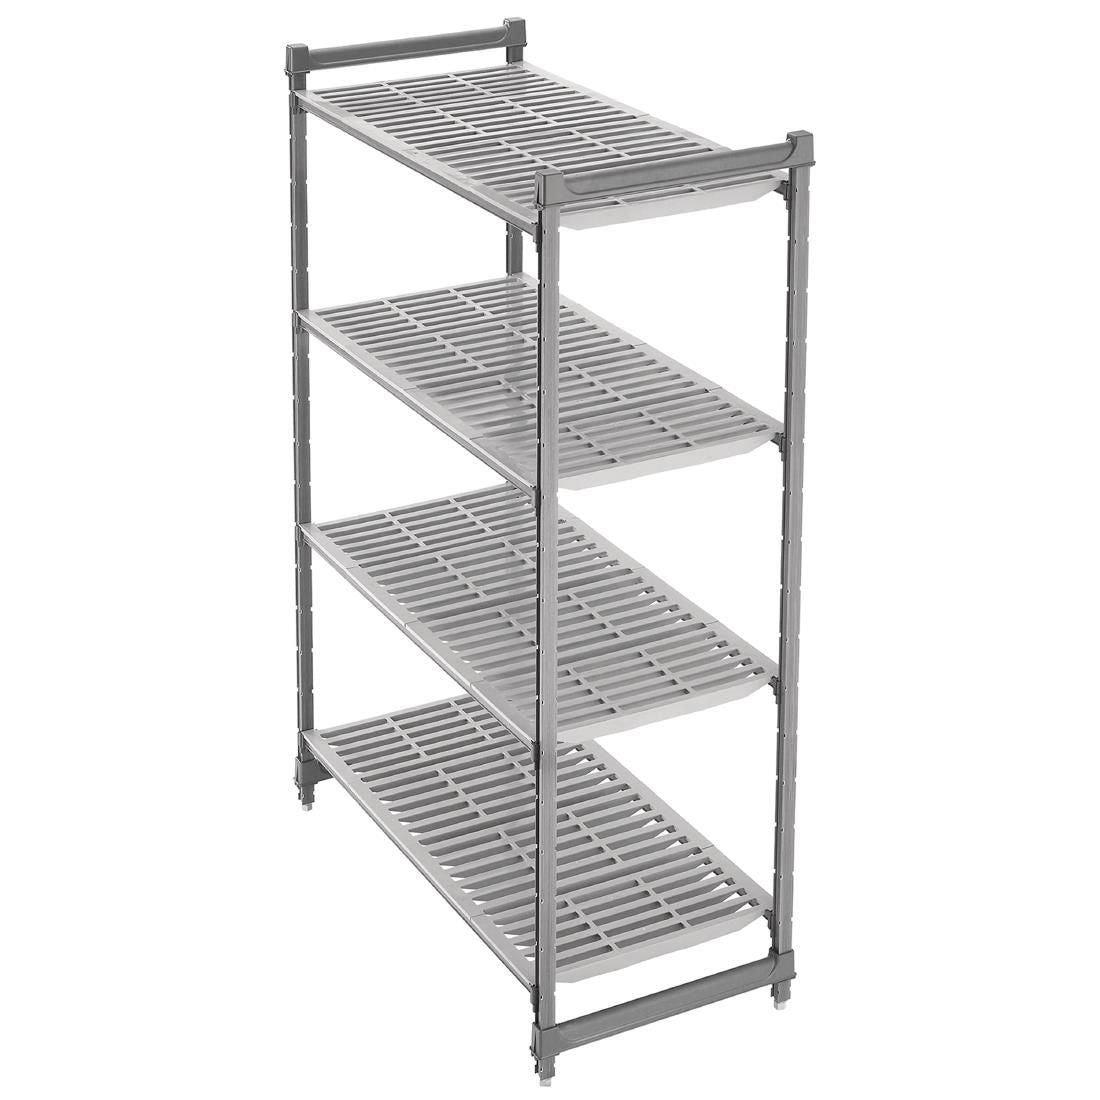 DM770 Cambro Stationary Vented 4 Shelf Starter Units 1830 x 1070 x 460mm JD Catering Equipment Solutions Ltd